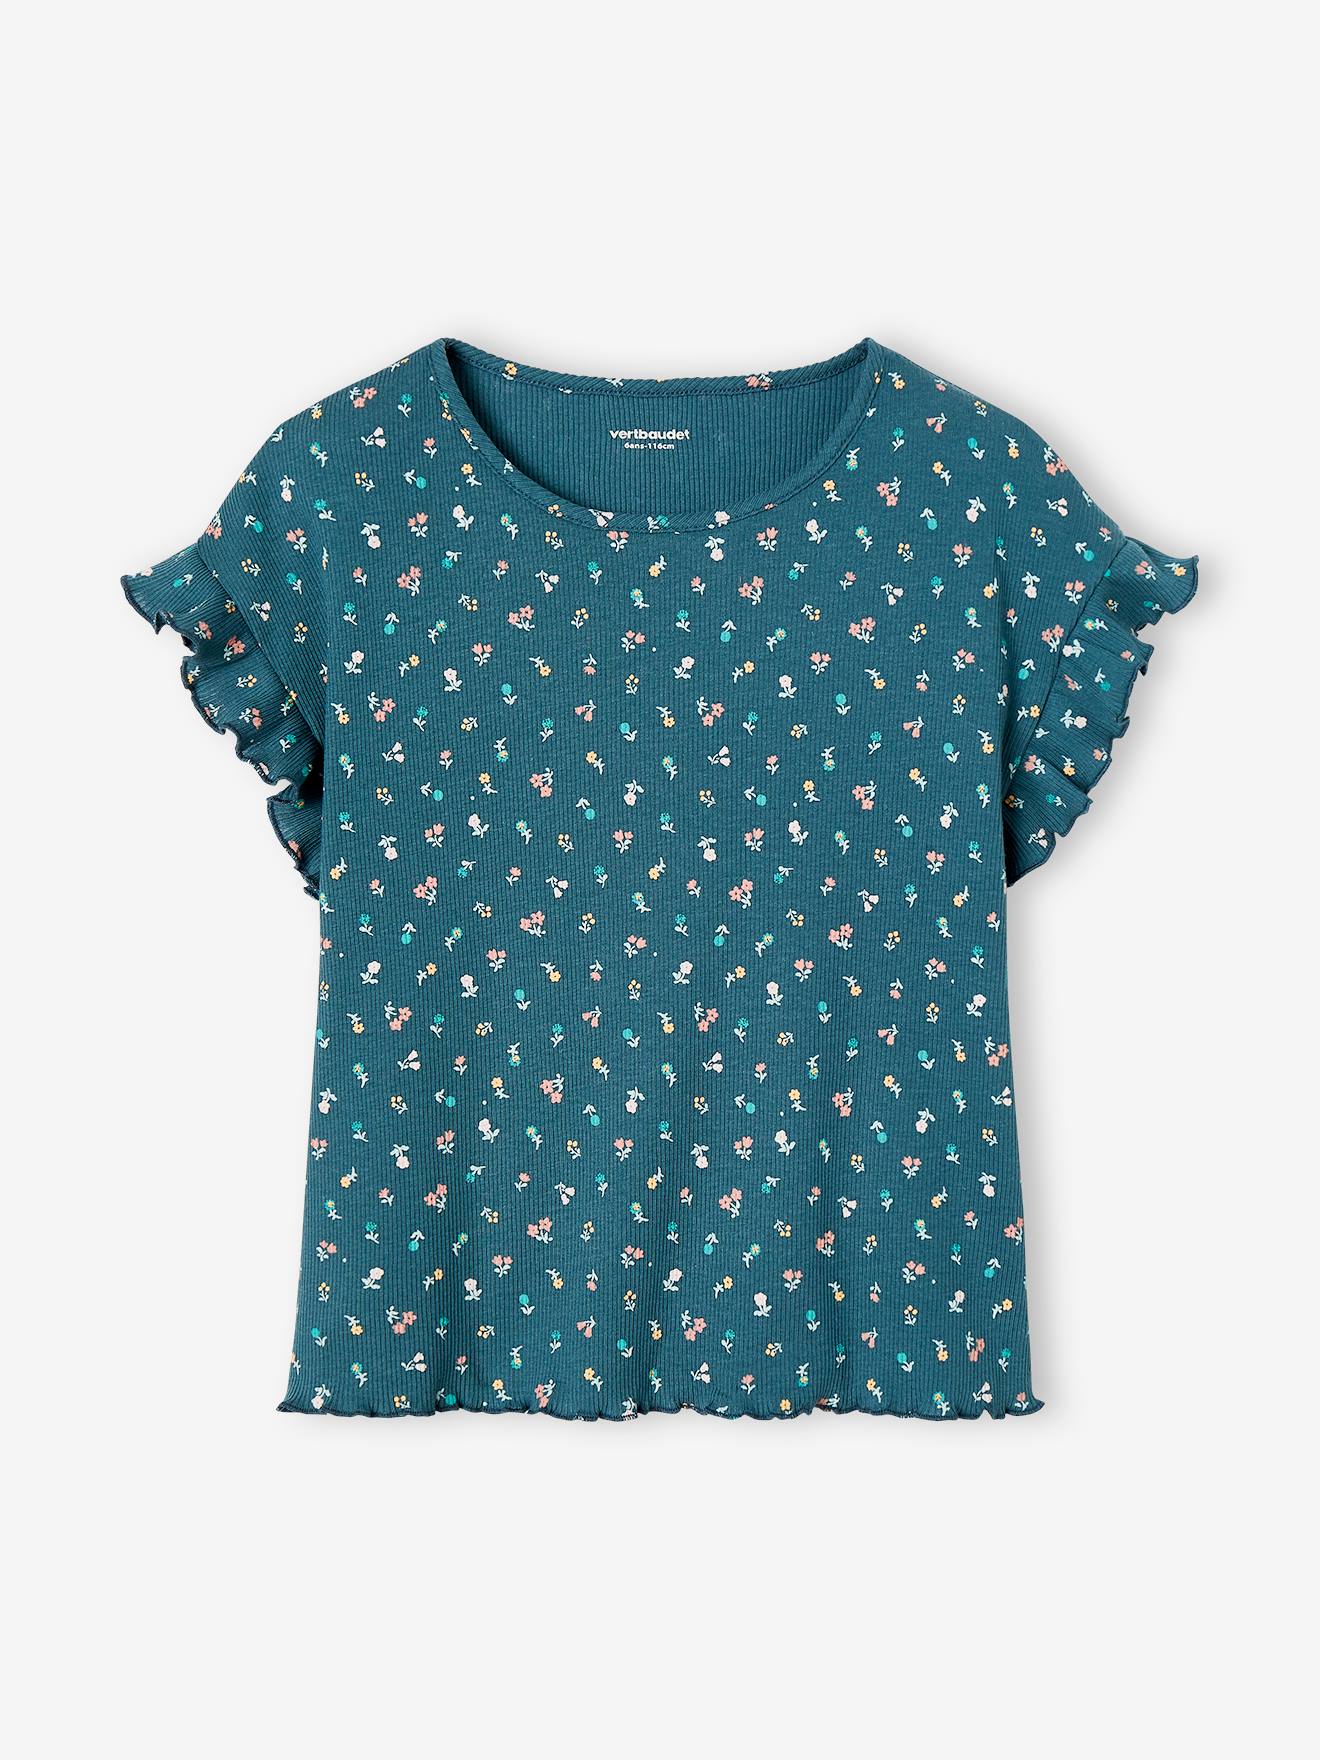 Rib Knit T-Shirt with Printed Flowers for Girls - ink blue, Girls